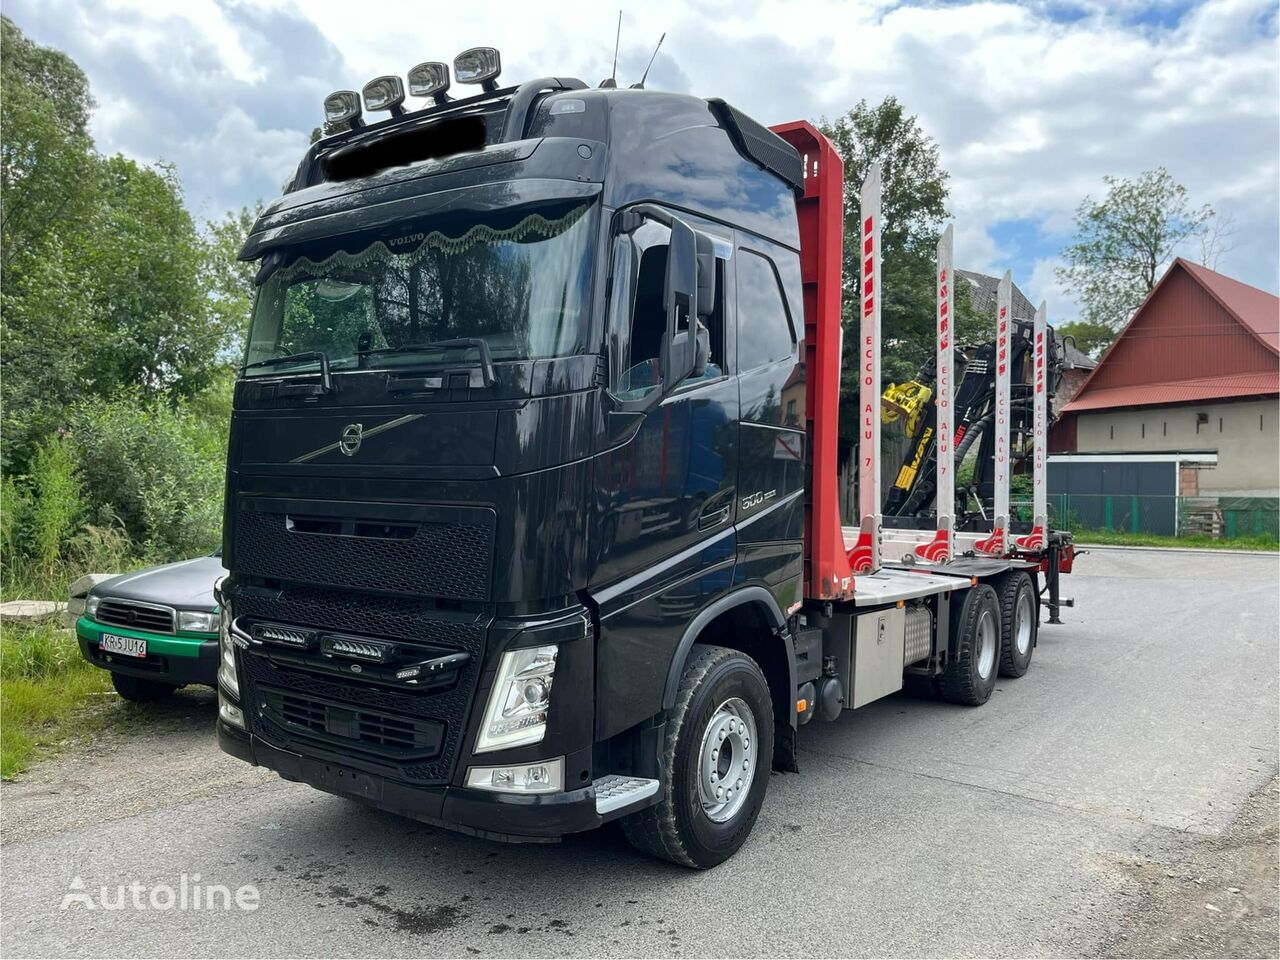 Volvo FH13 500 timber truck